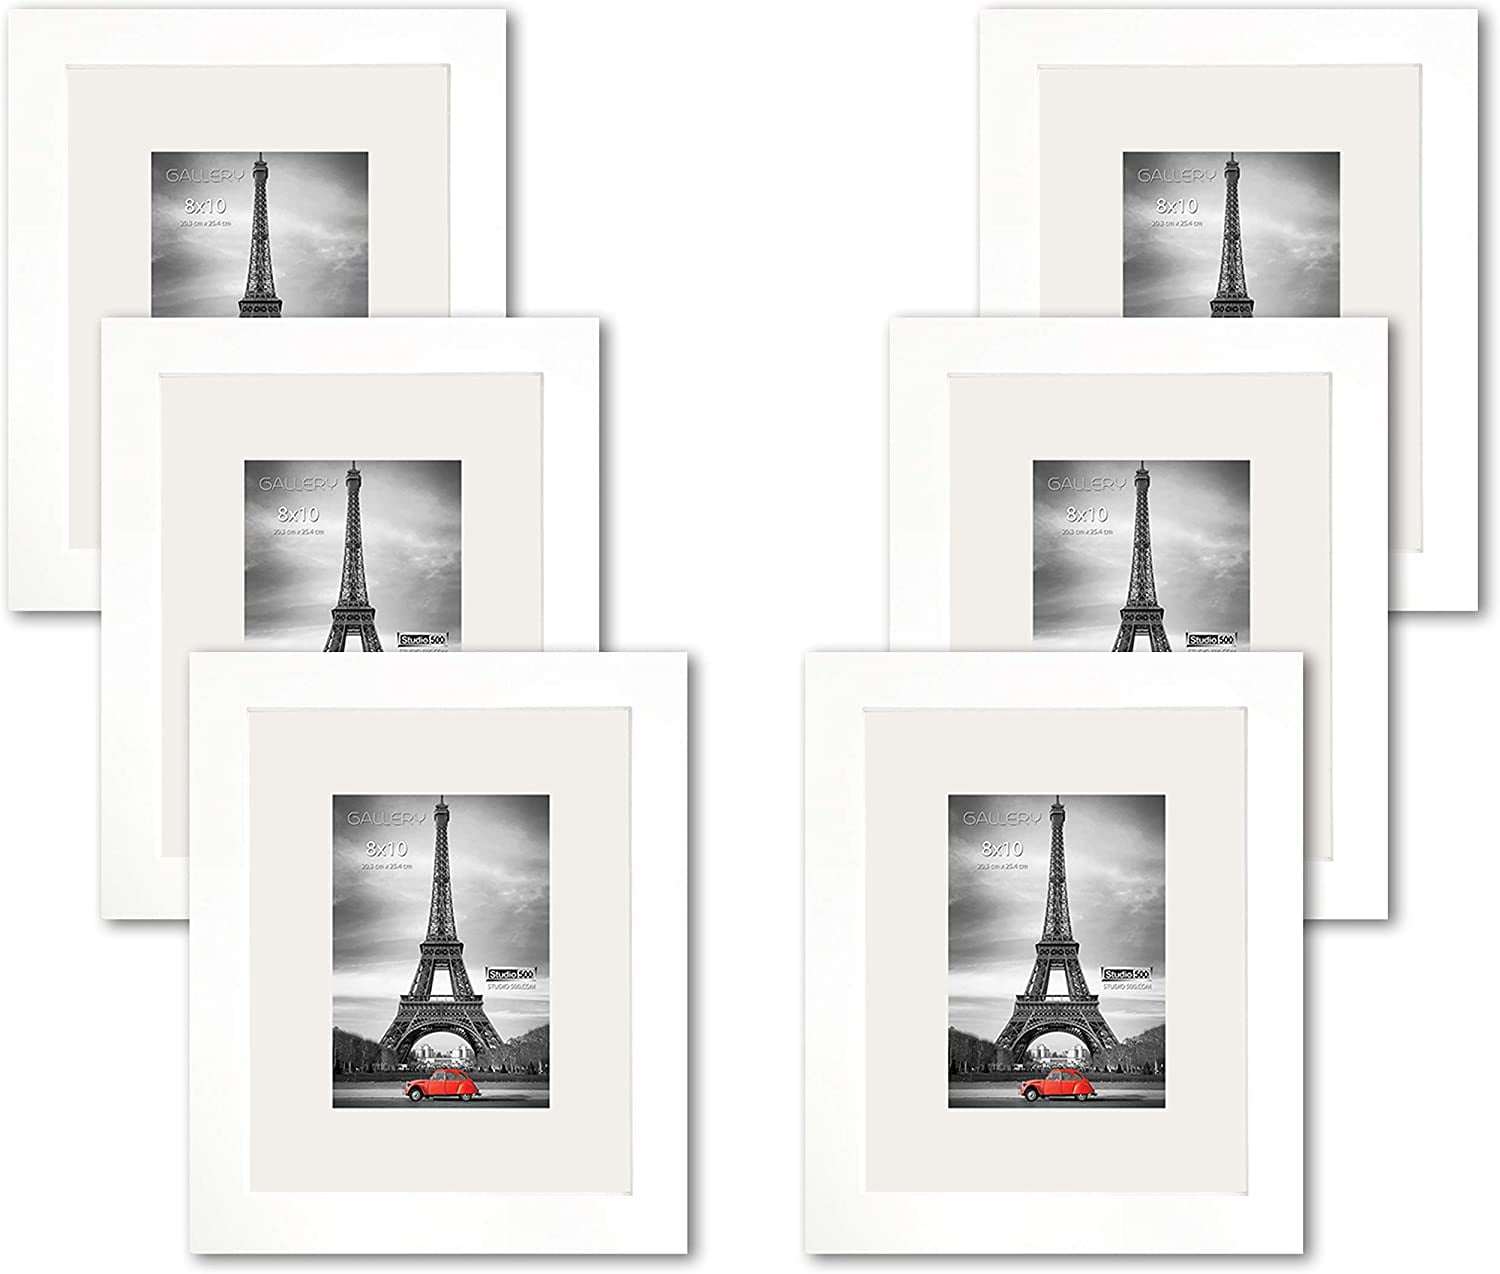 Studio 500 VALUE 2-PACK~16x20 Smooth White Contemporary Picture Frame Set! 